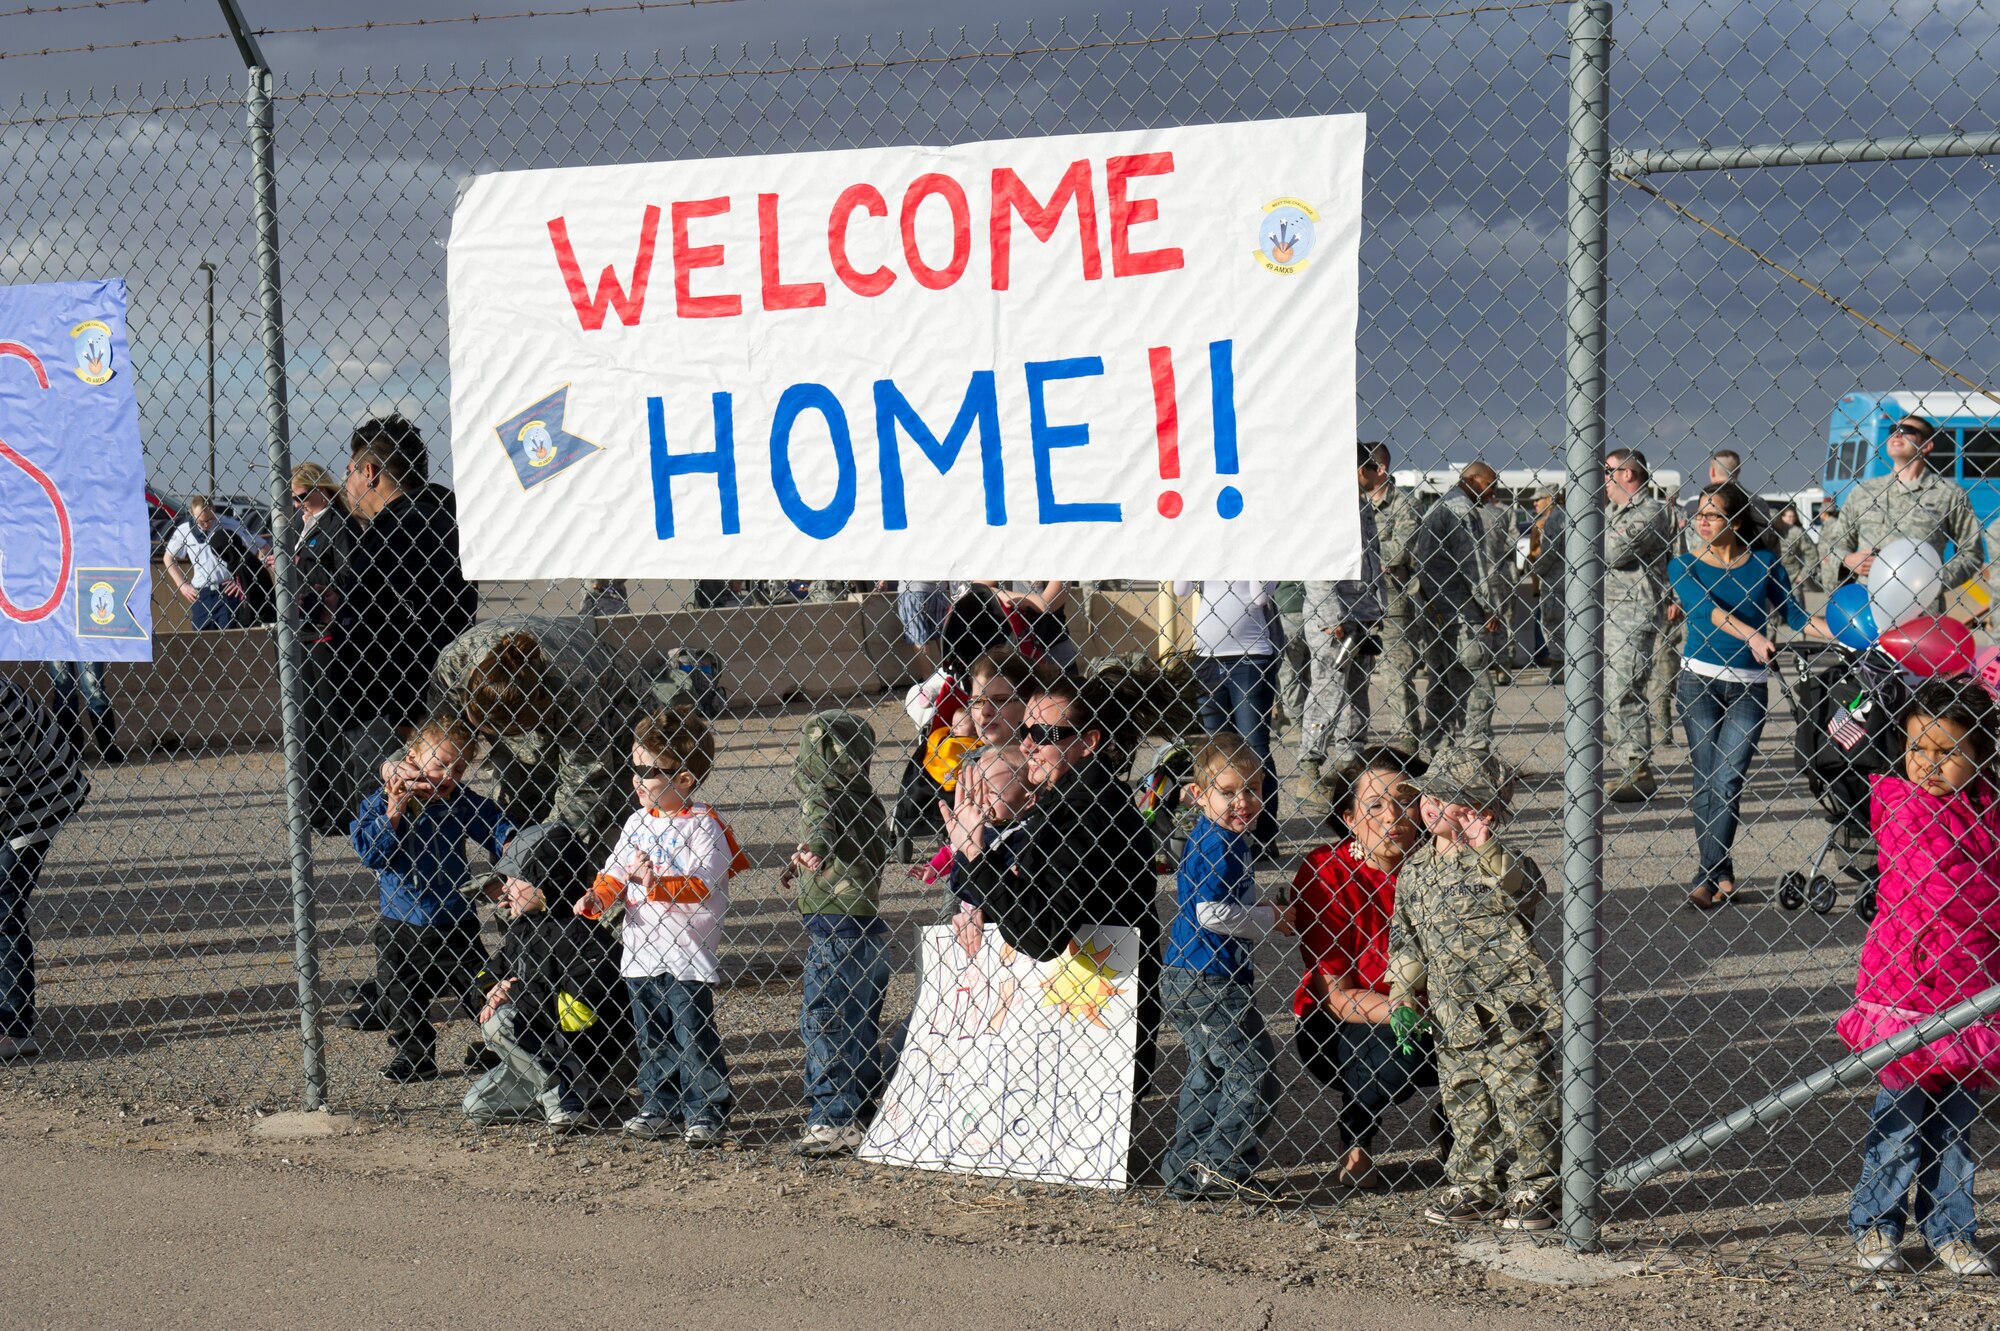 Friends and family await the return of around 200 Airmen from the 7th Fighter Squadron and the 49th Maintenance Group on the Holloman Air Force Base, N.M. flightline, Jan. 28. F-22 Raptors and around 200 personnel returned Monday from a 9-month deployment to Southwest Asia ensuring regional security and joint tactical air operations. (U.S. Air Force photo by Airman 1st Class Michael Shoemaker/Released)